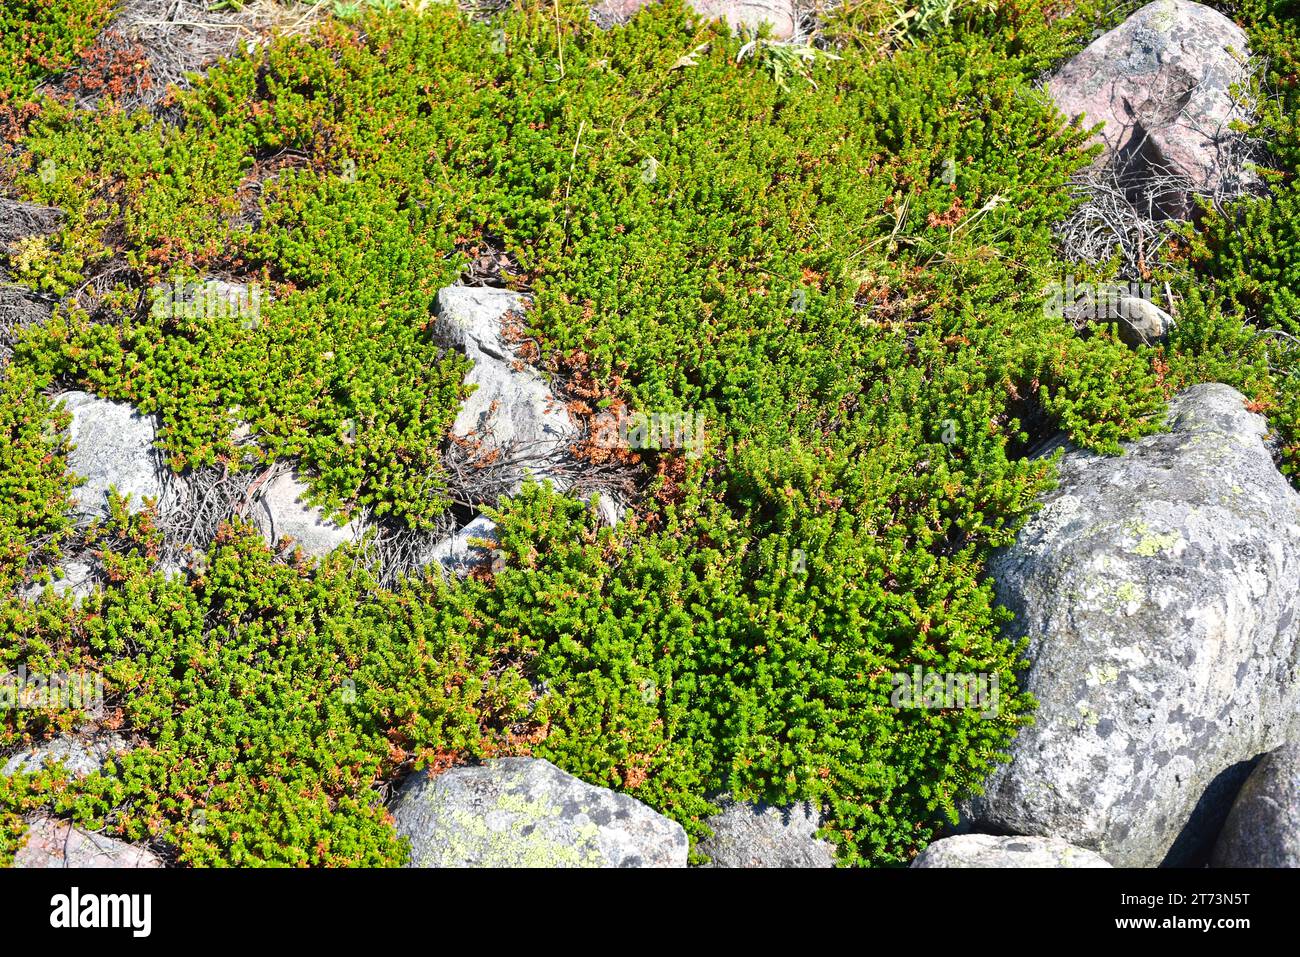 Black crowberry (Empetrum nigrum) is a shrub native to north Europe and south Europe mountains. This photo was taken in Bohuslan, Sweden. Stock Photo